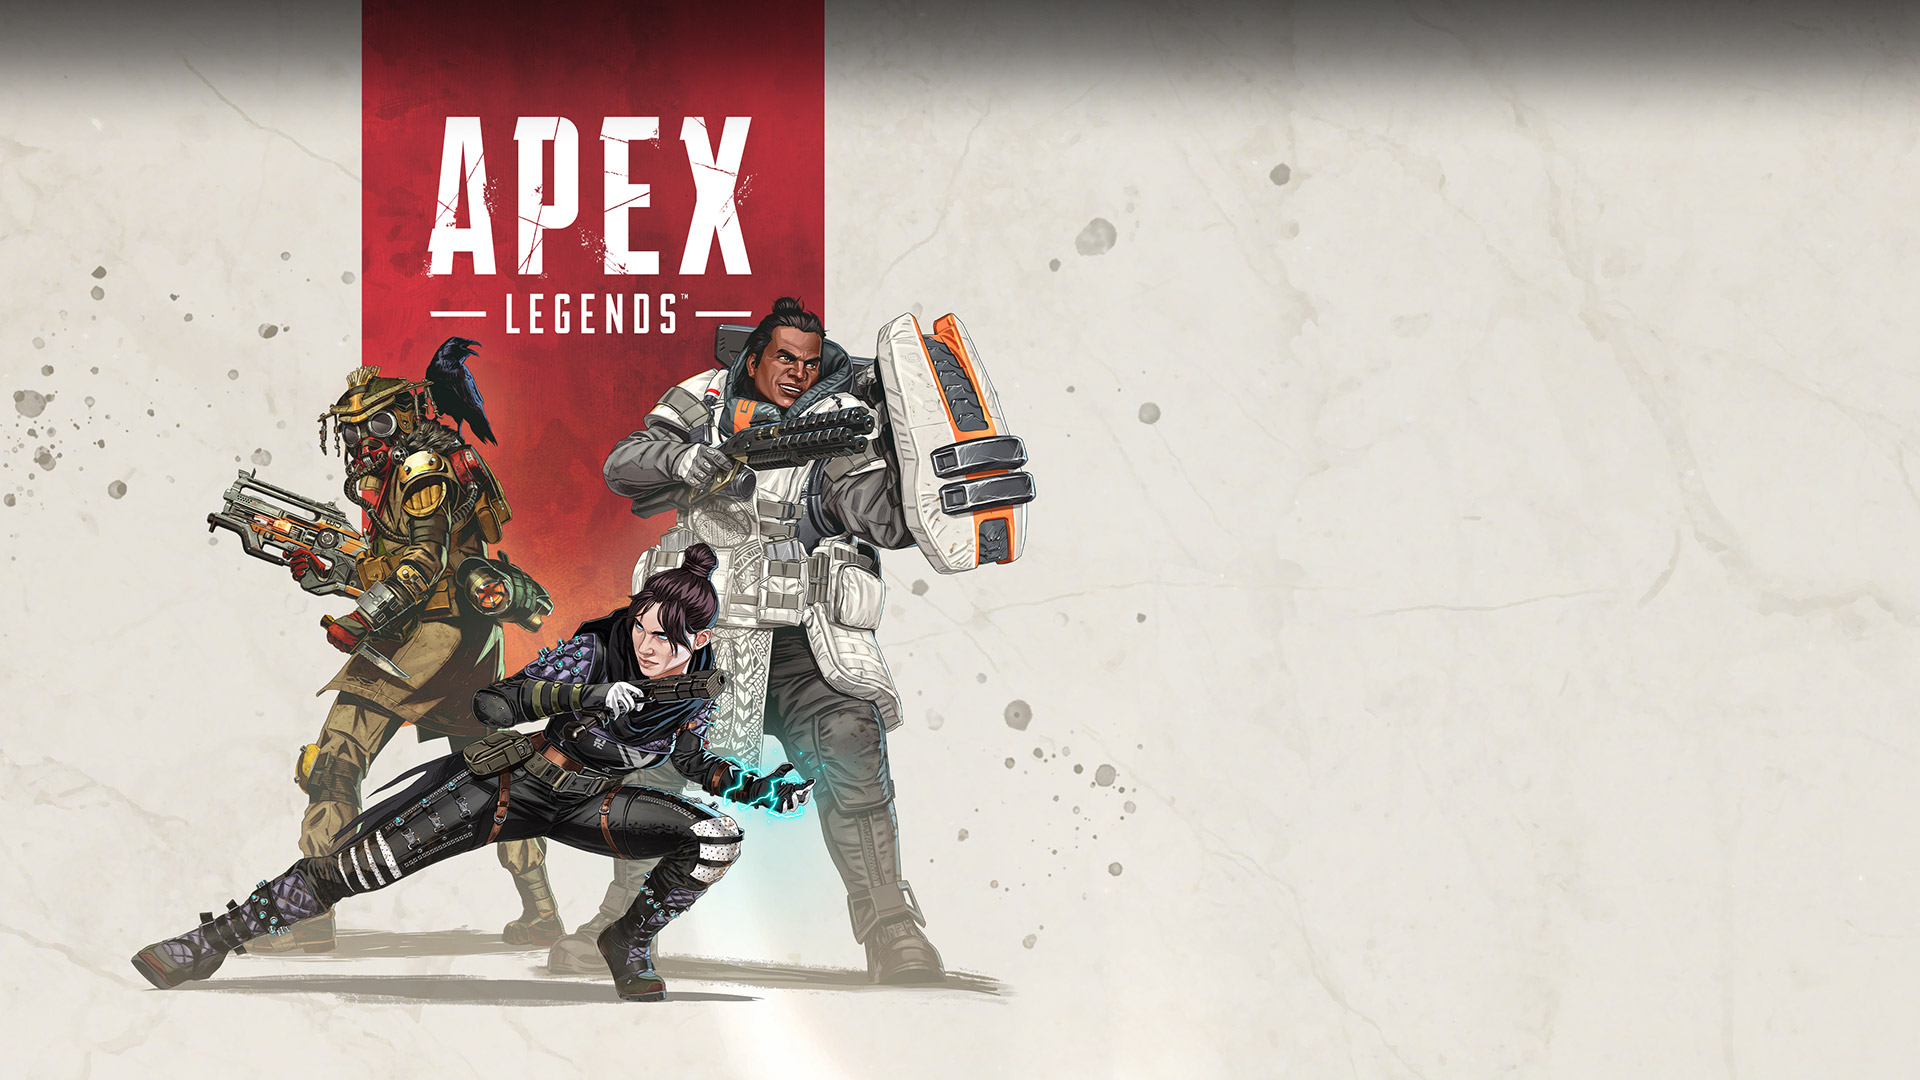 Apex Legends, three character classes strike battle poses.